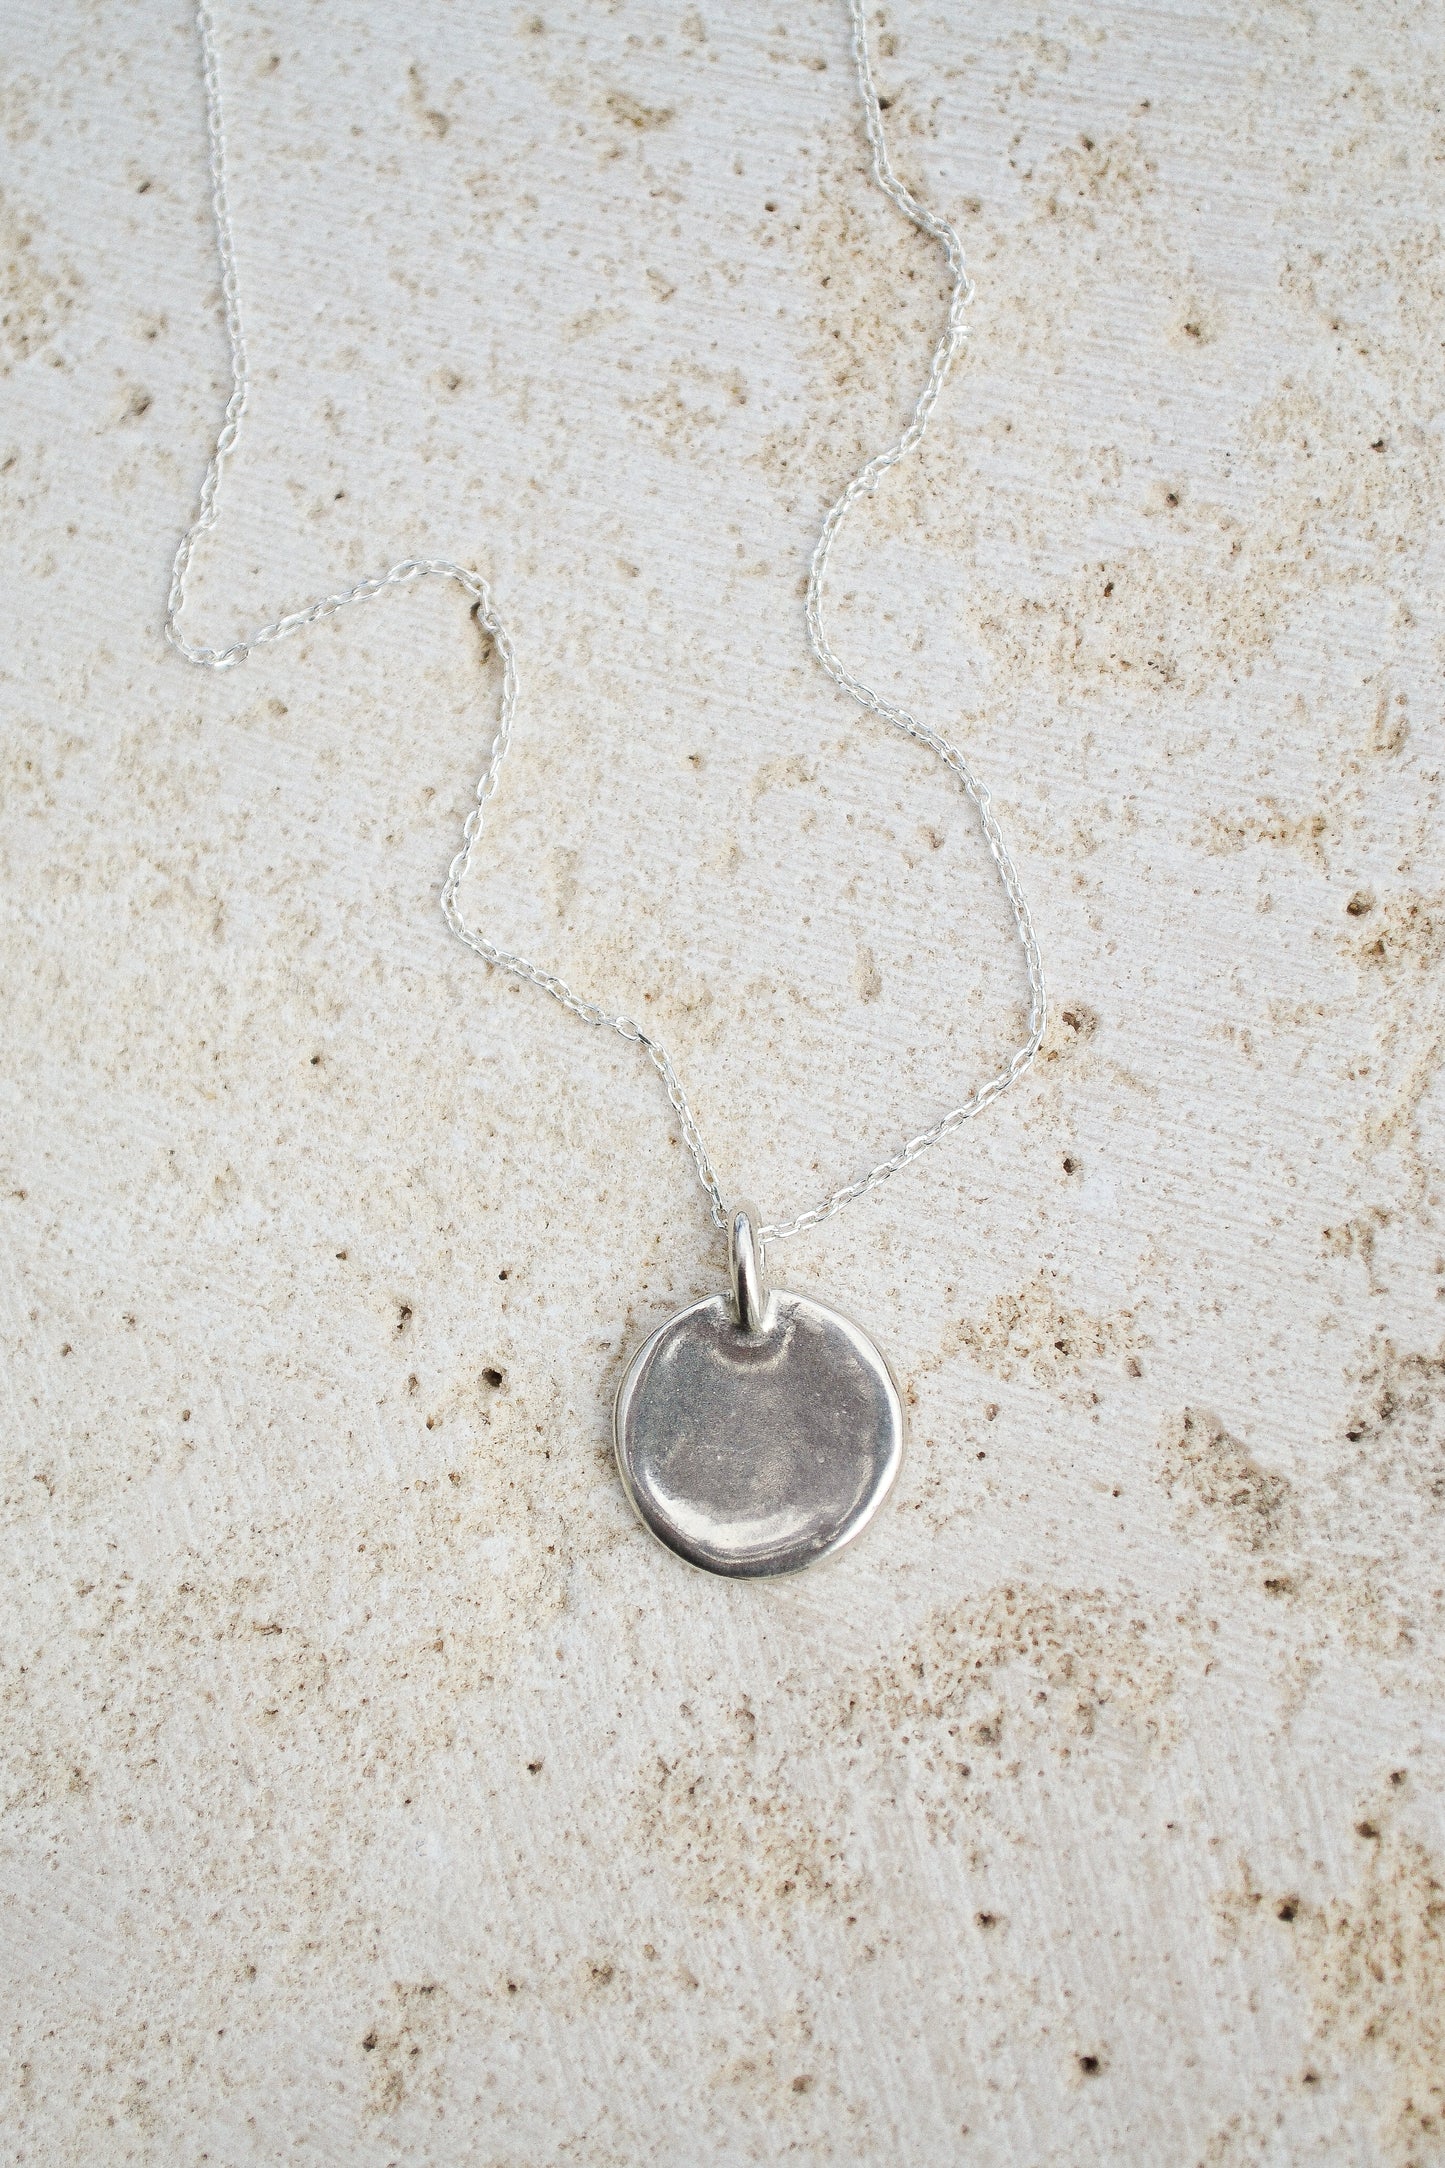 A classic everyday medallion necklace. Simple and feminine with a fluid feel. Inspired by the artist Georgia O'Keeffe. Georgia Necklace by Amanda Hunt